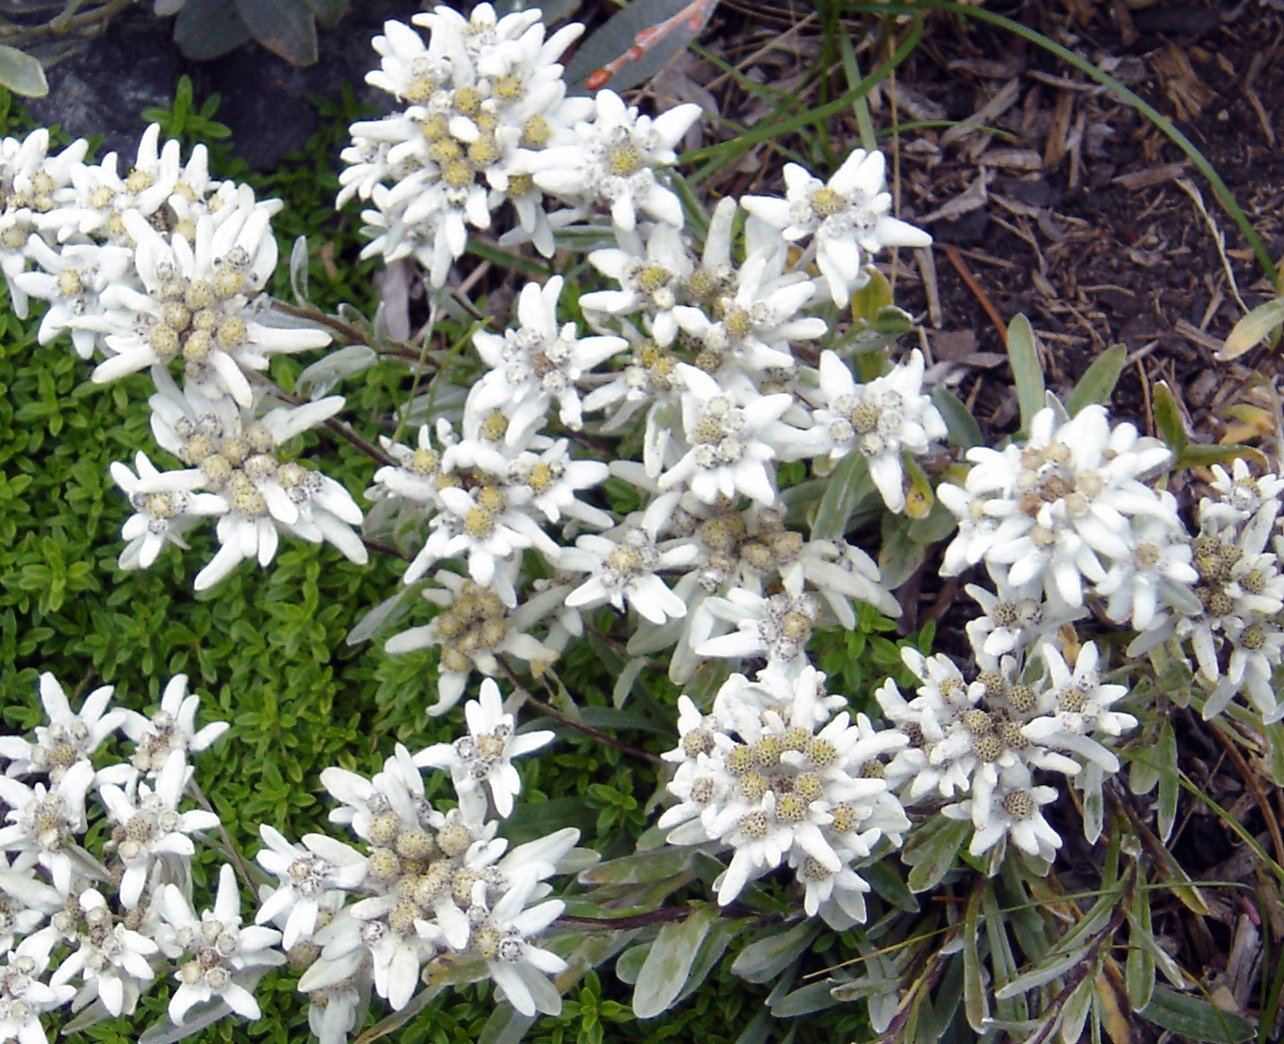 a cluster of white flowers blooming amongst green plants